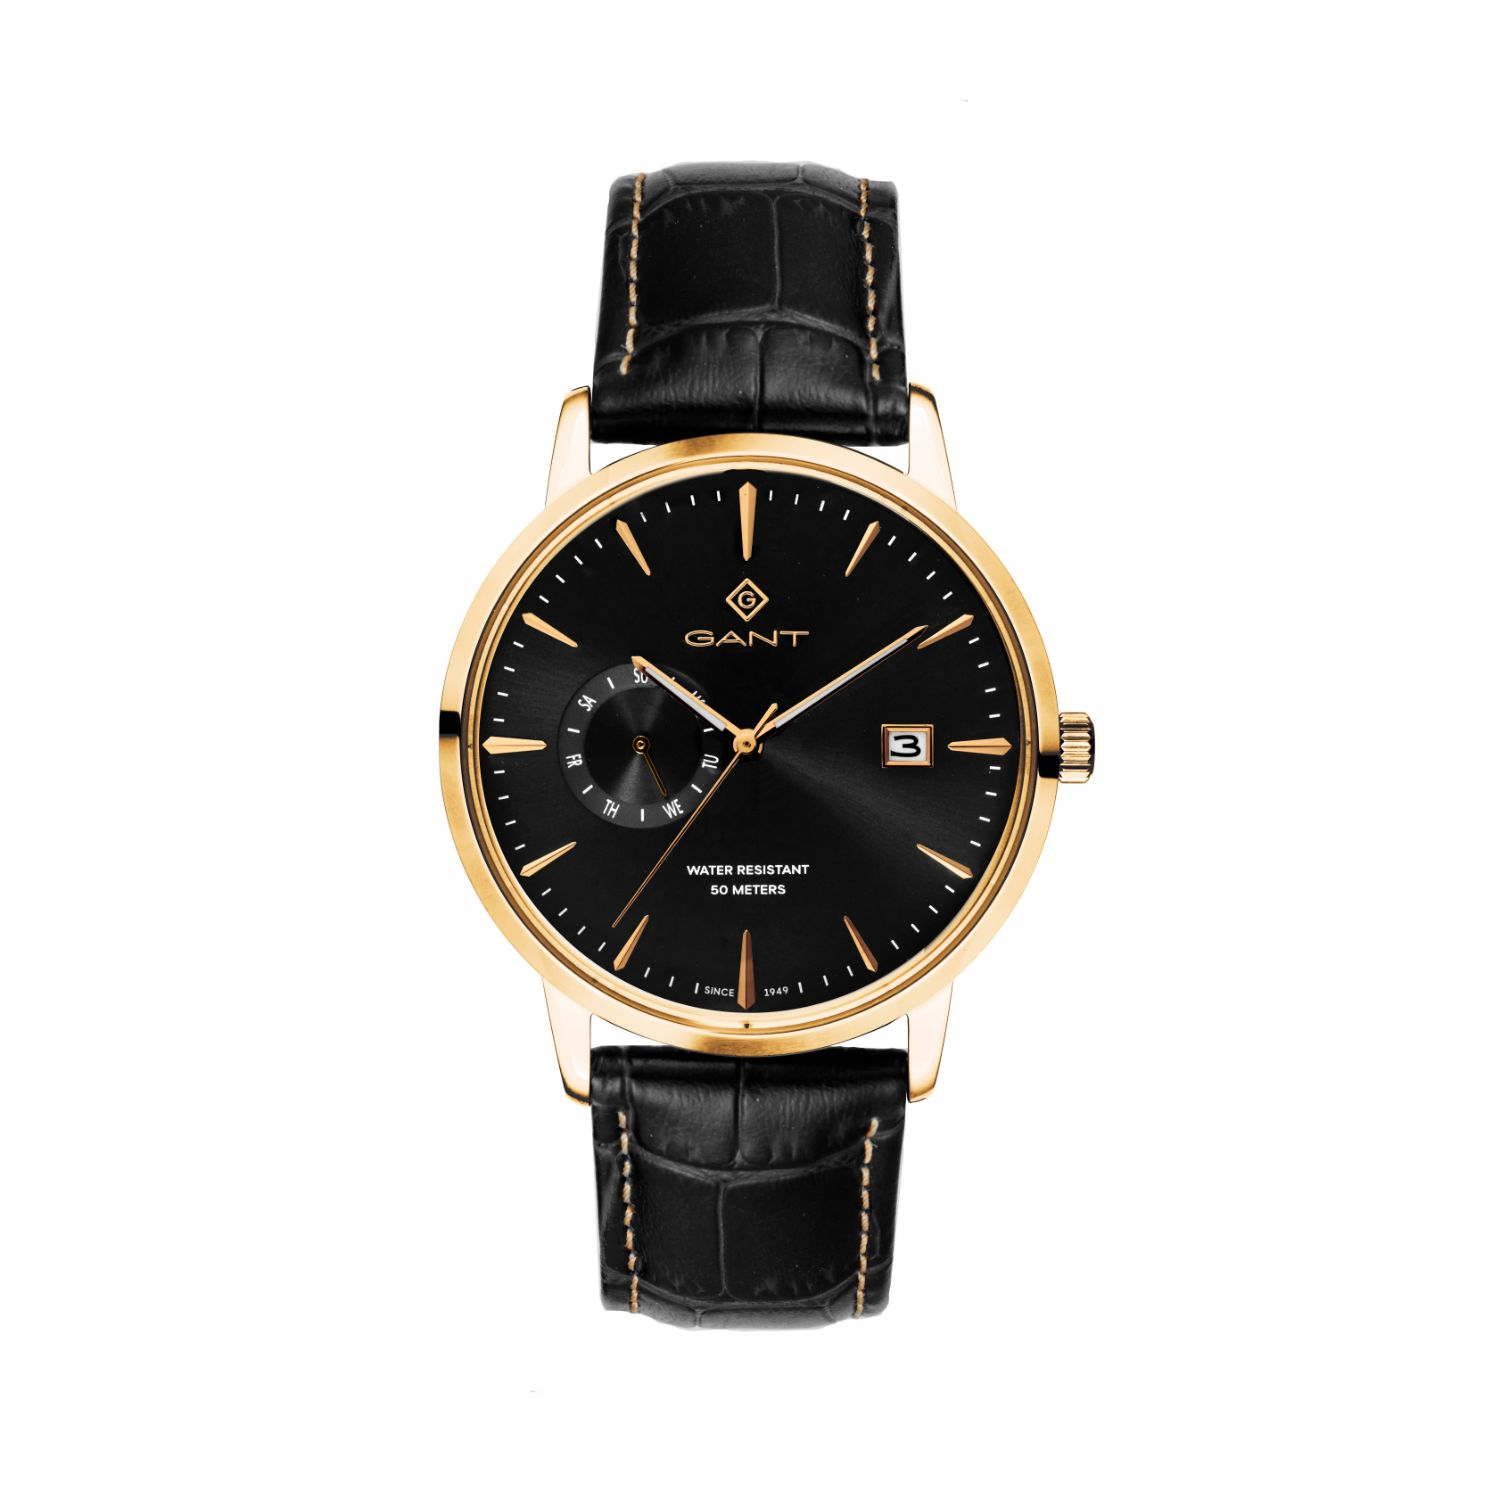 Mens GANT stainless steel watch with black dial and leather strap.